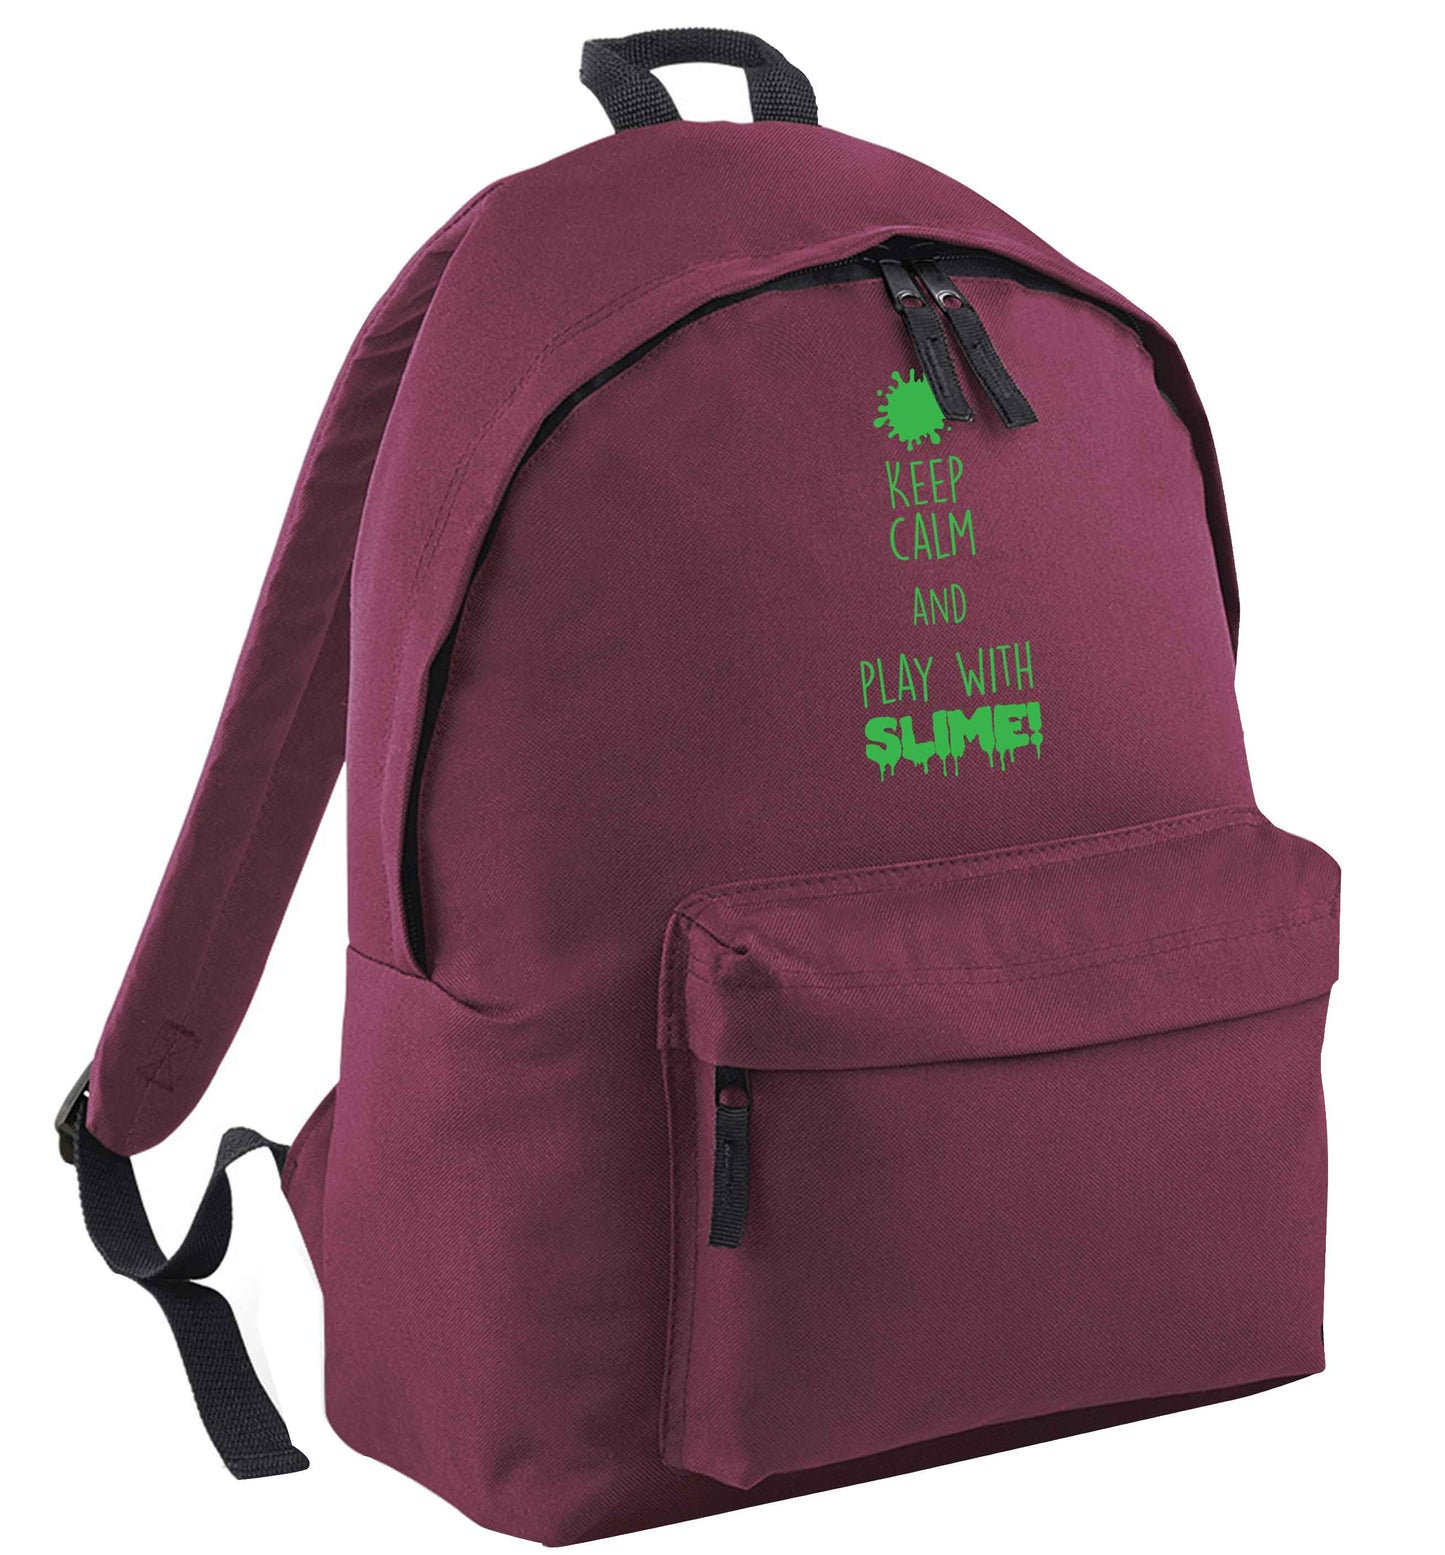 Neon green keep calm and play with slime!black adults backpack